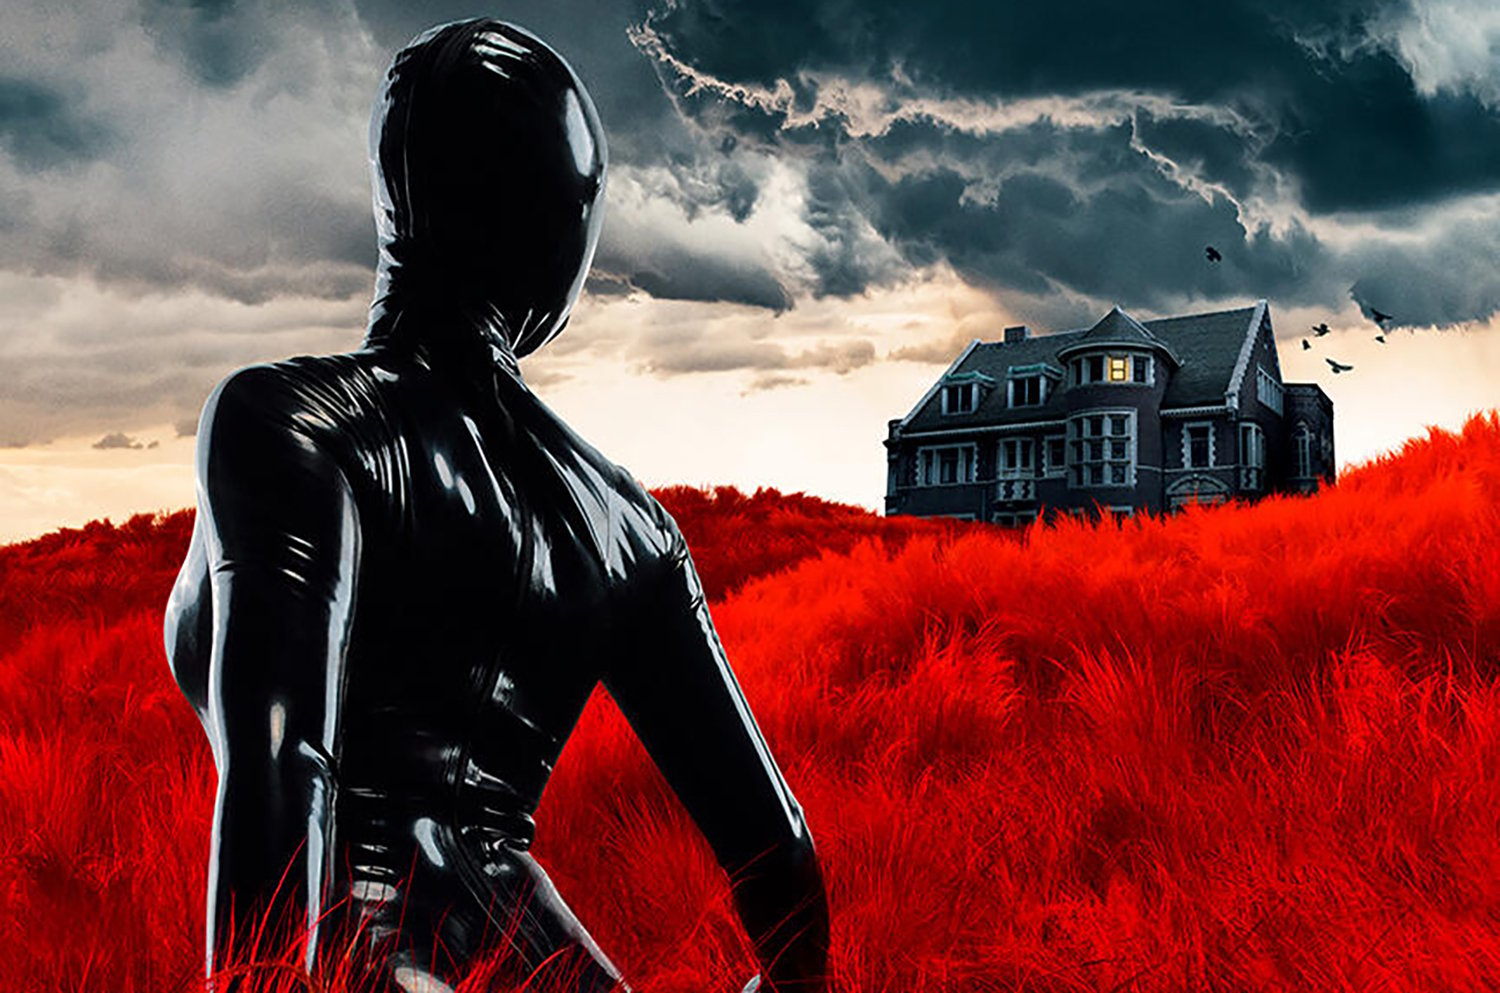 American Horror Stories Season 1 key art: a person in a black skin suit standing in red grass looking at a house in the distance